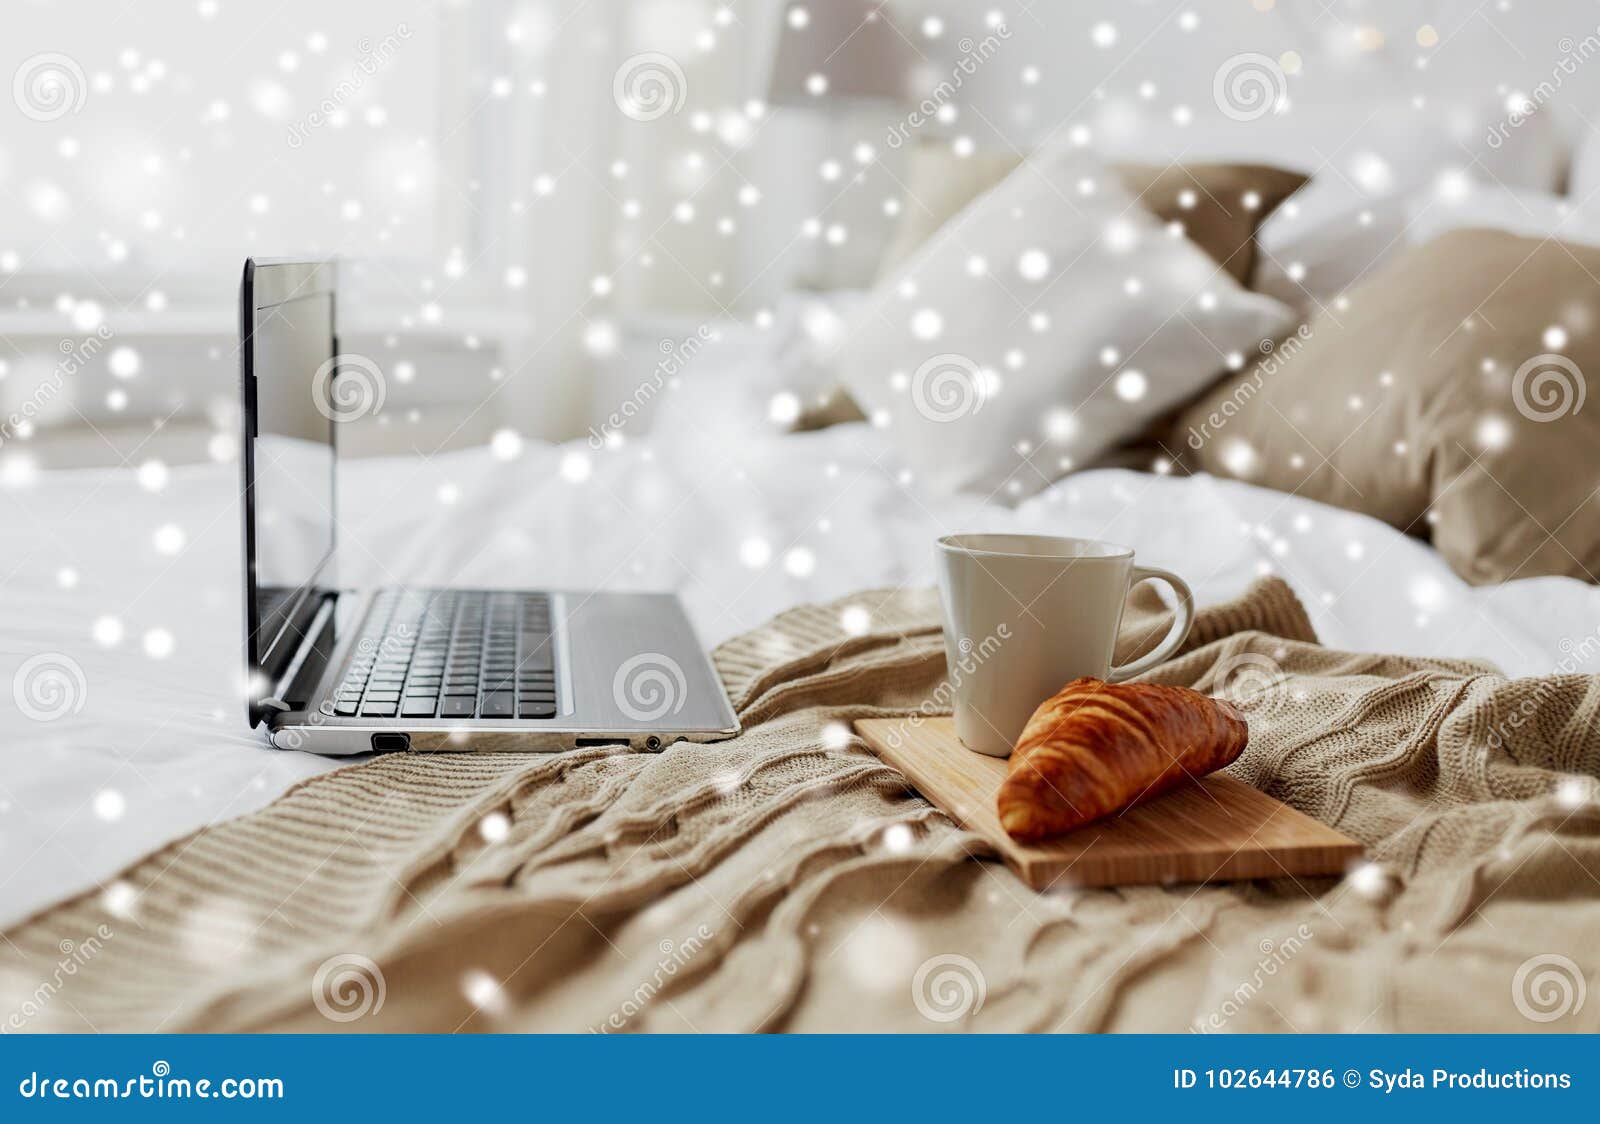 The Laptop And Computer In The Morning On A White Pillow Bed Lifestyle  Concept Stock Photo - Download Image Now - iStock